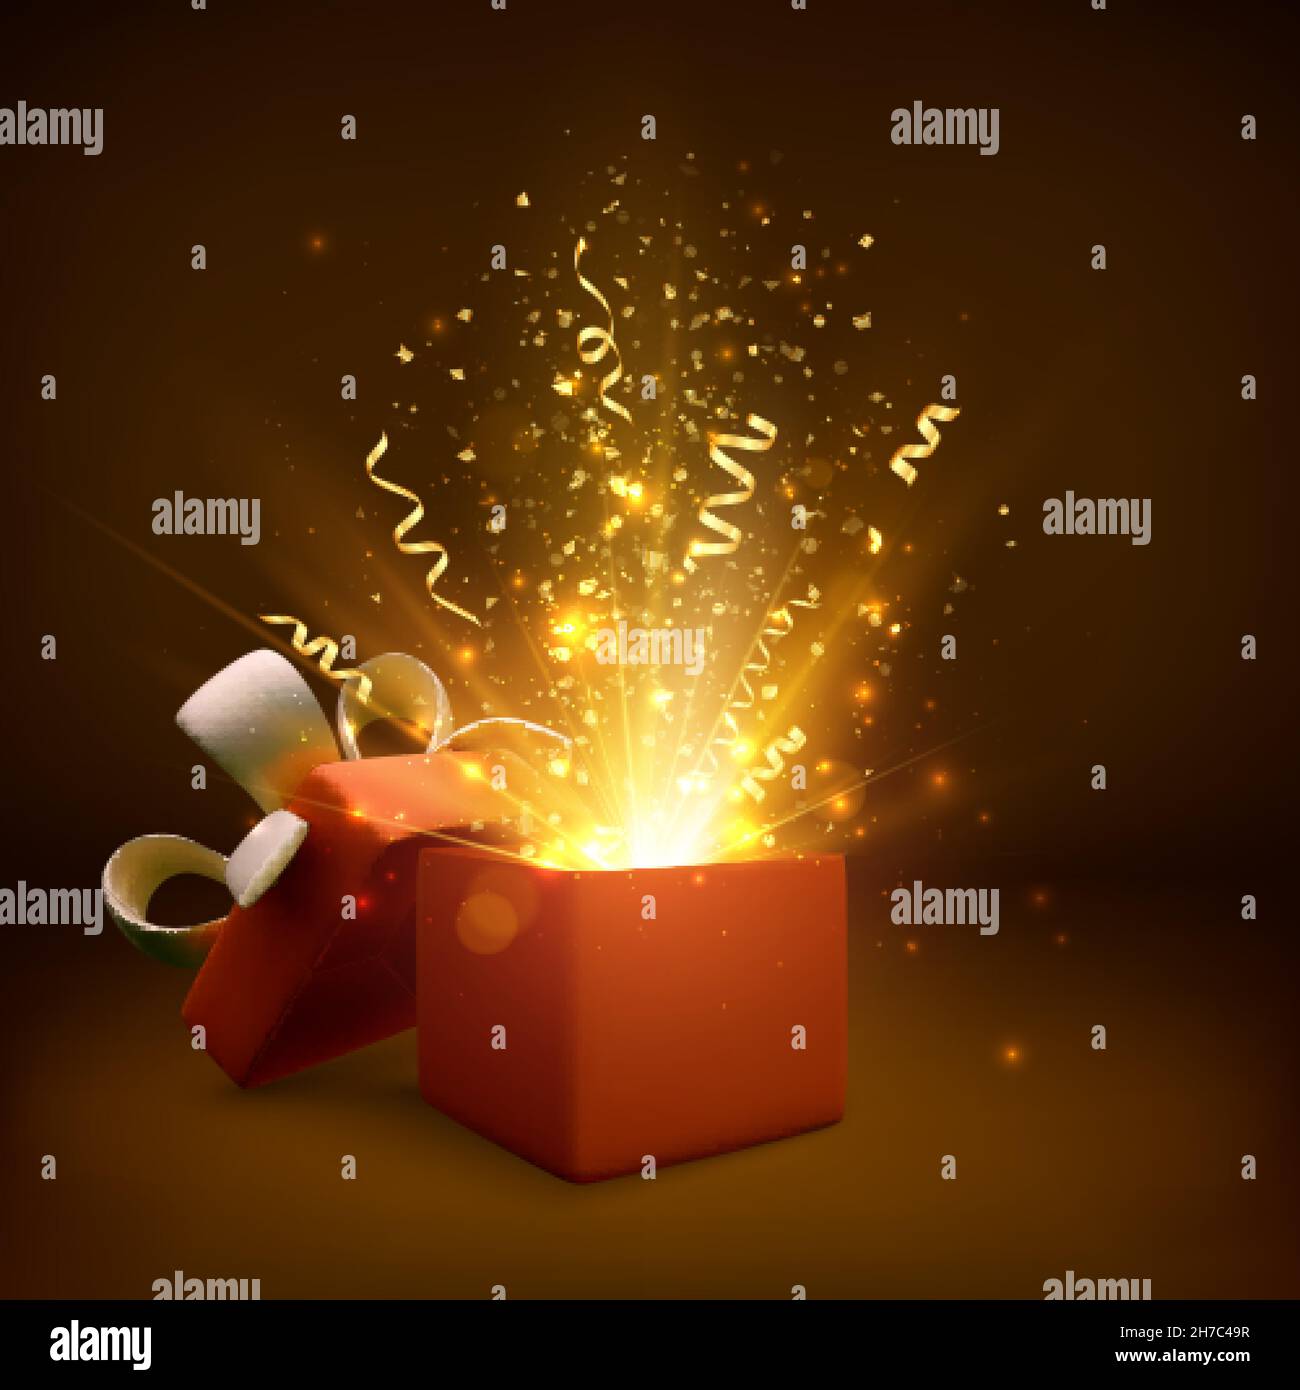 Open gift with fireworks and glitter. Present box decoration design element. Holiday banner with open box. Vector illustration Stock Vector